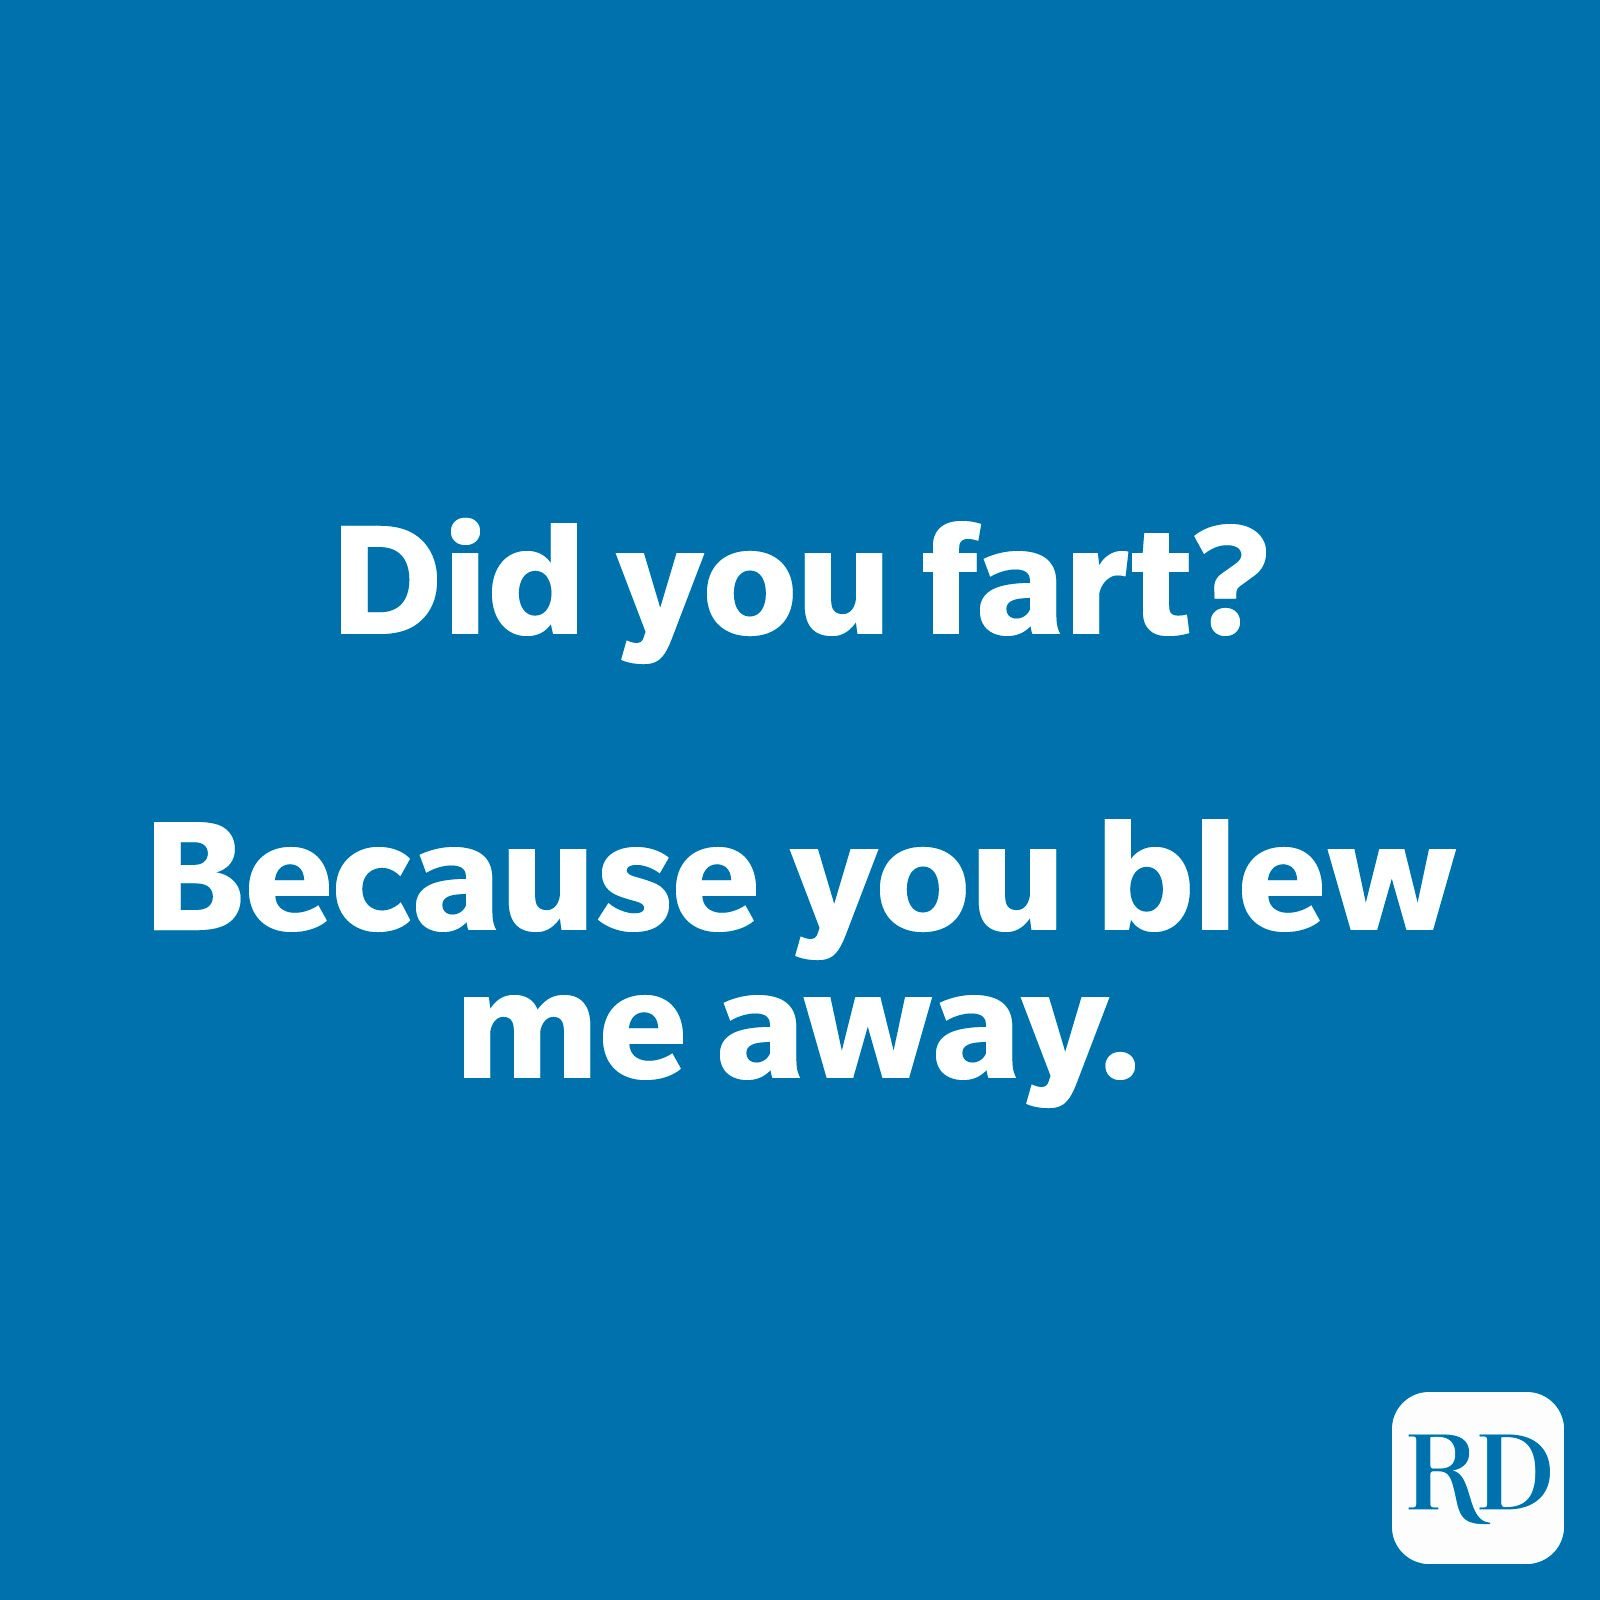 Did you fart? Because you blew me away.